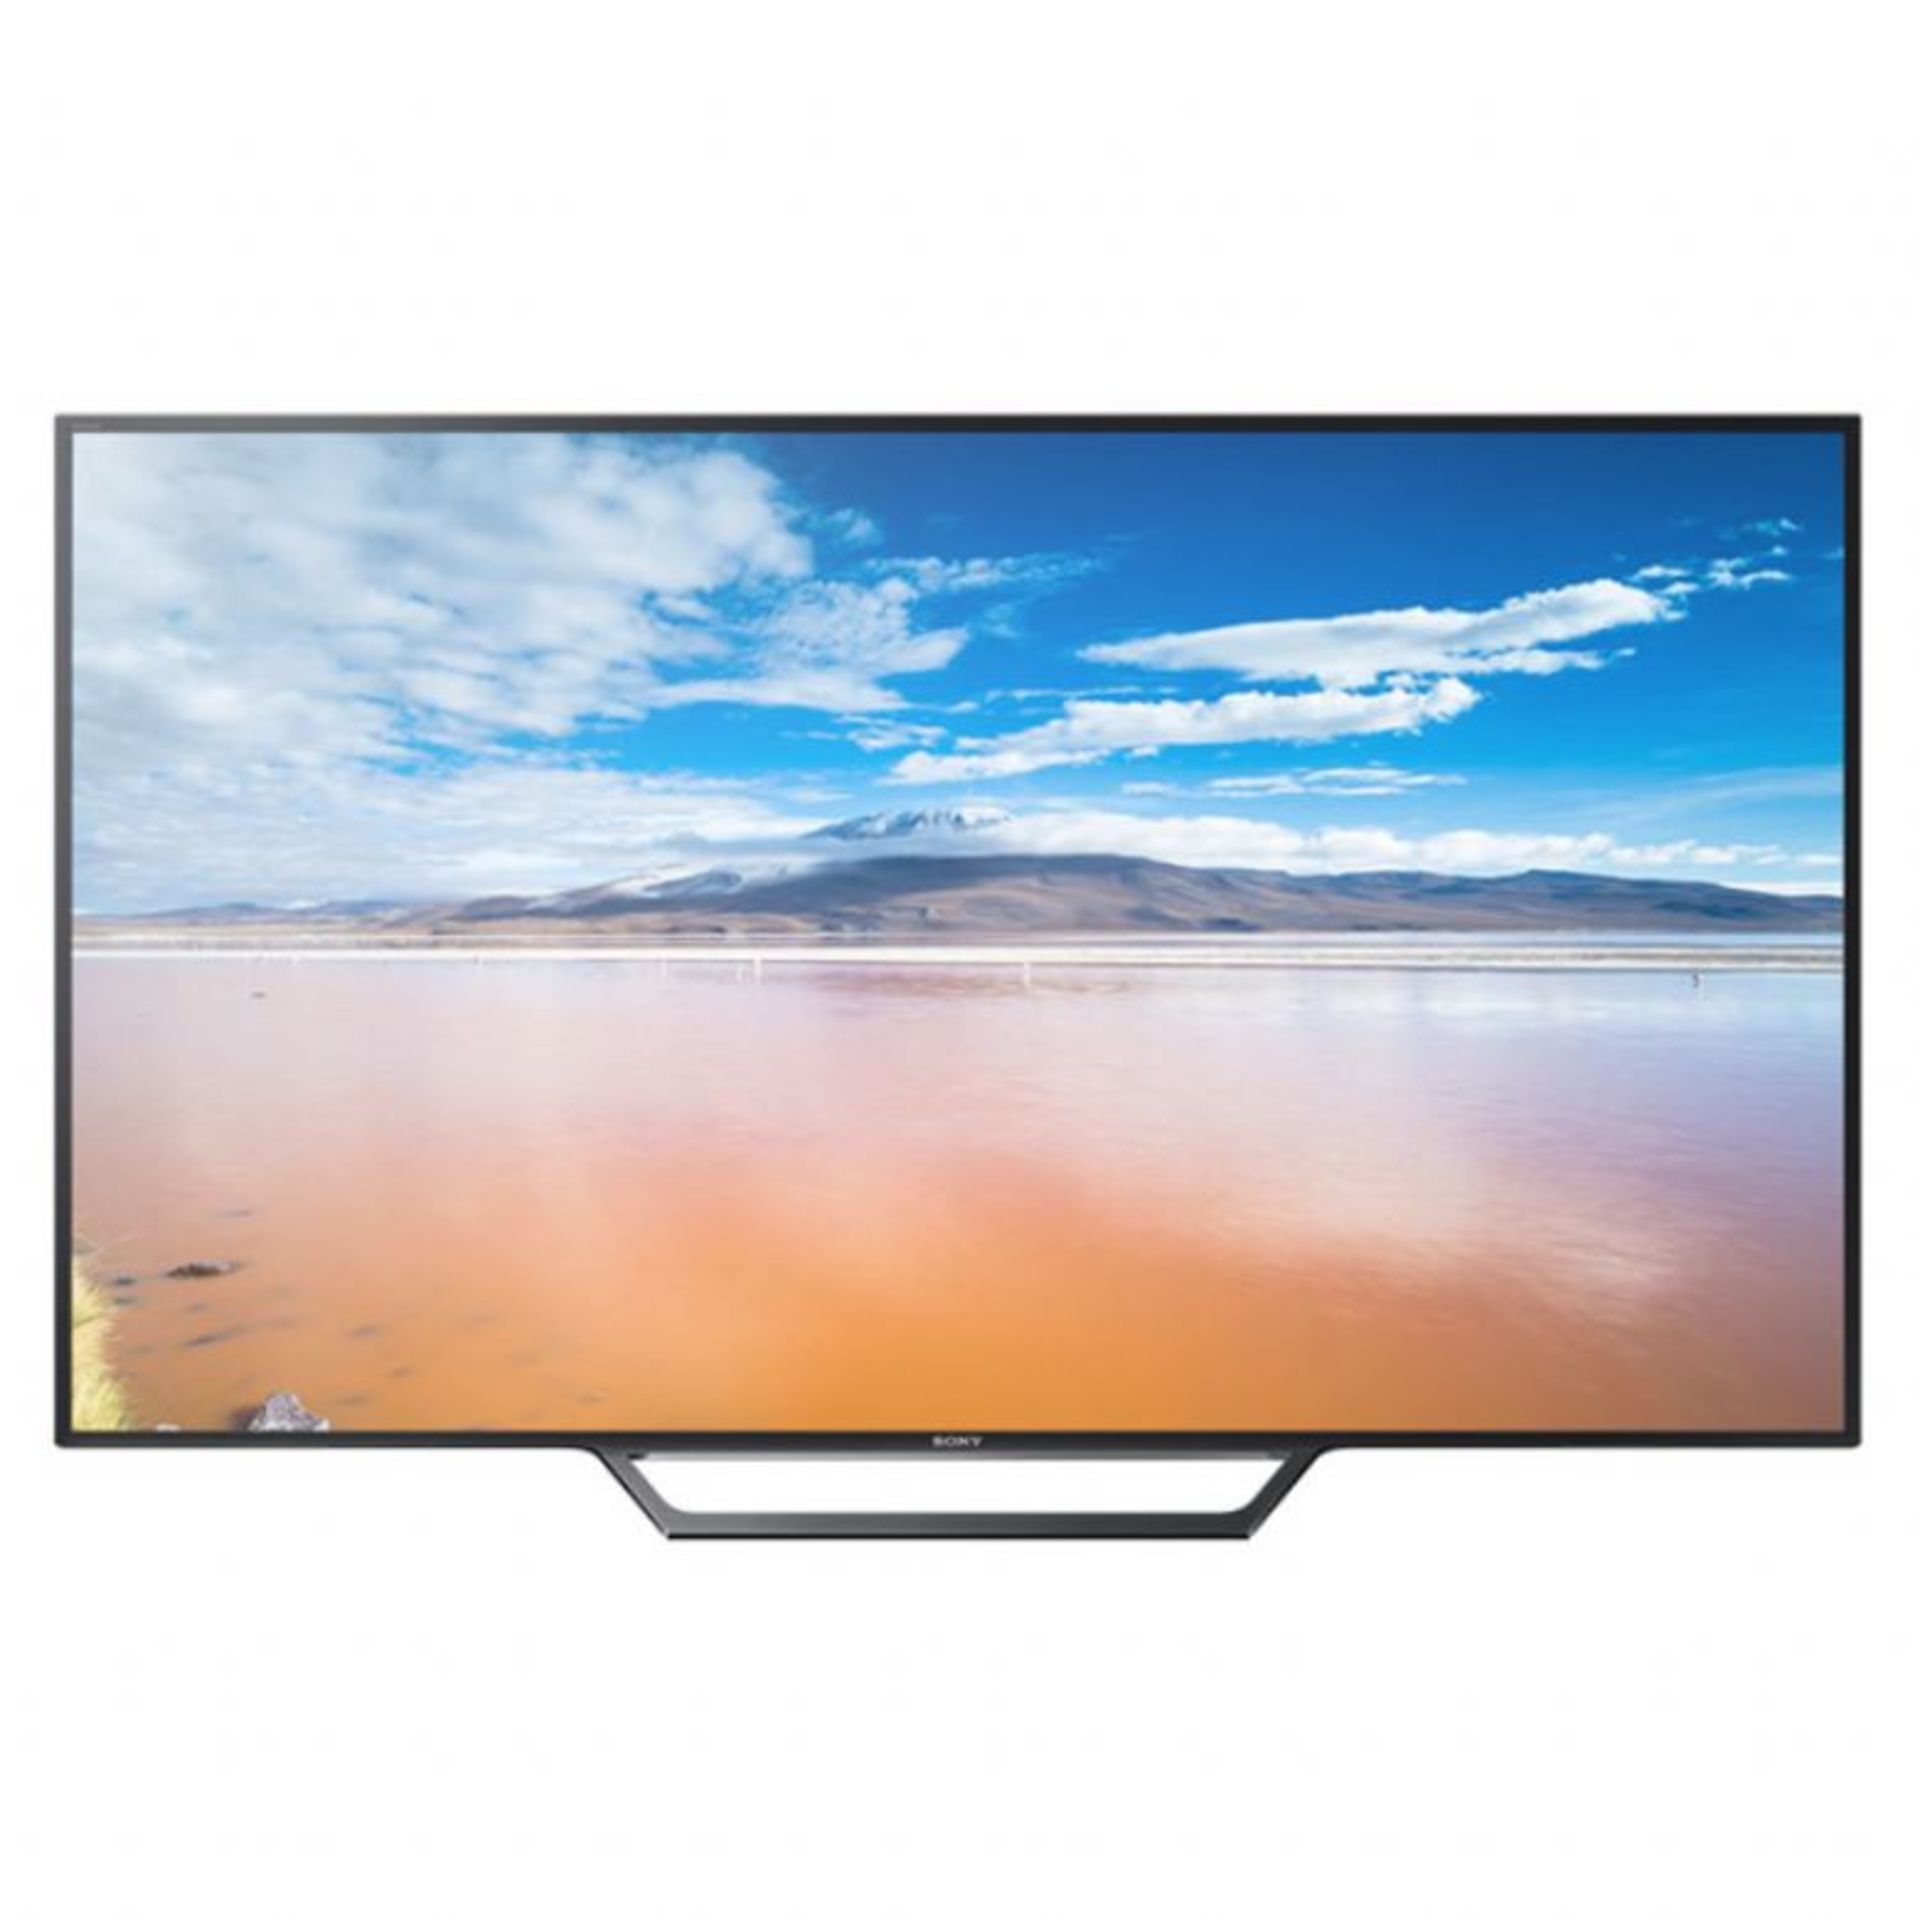 (T31) Sony Bravia KDL48WD653 48 inch Full HD Smart TV with Freeview, HDD . RRP £649. X-Reality Pro - Image 2 of 3